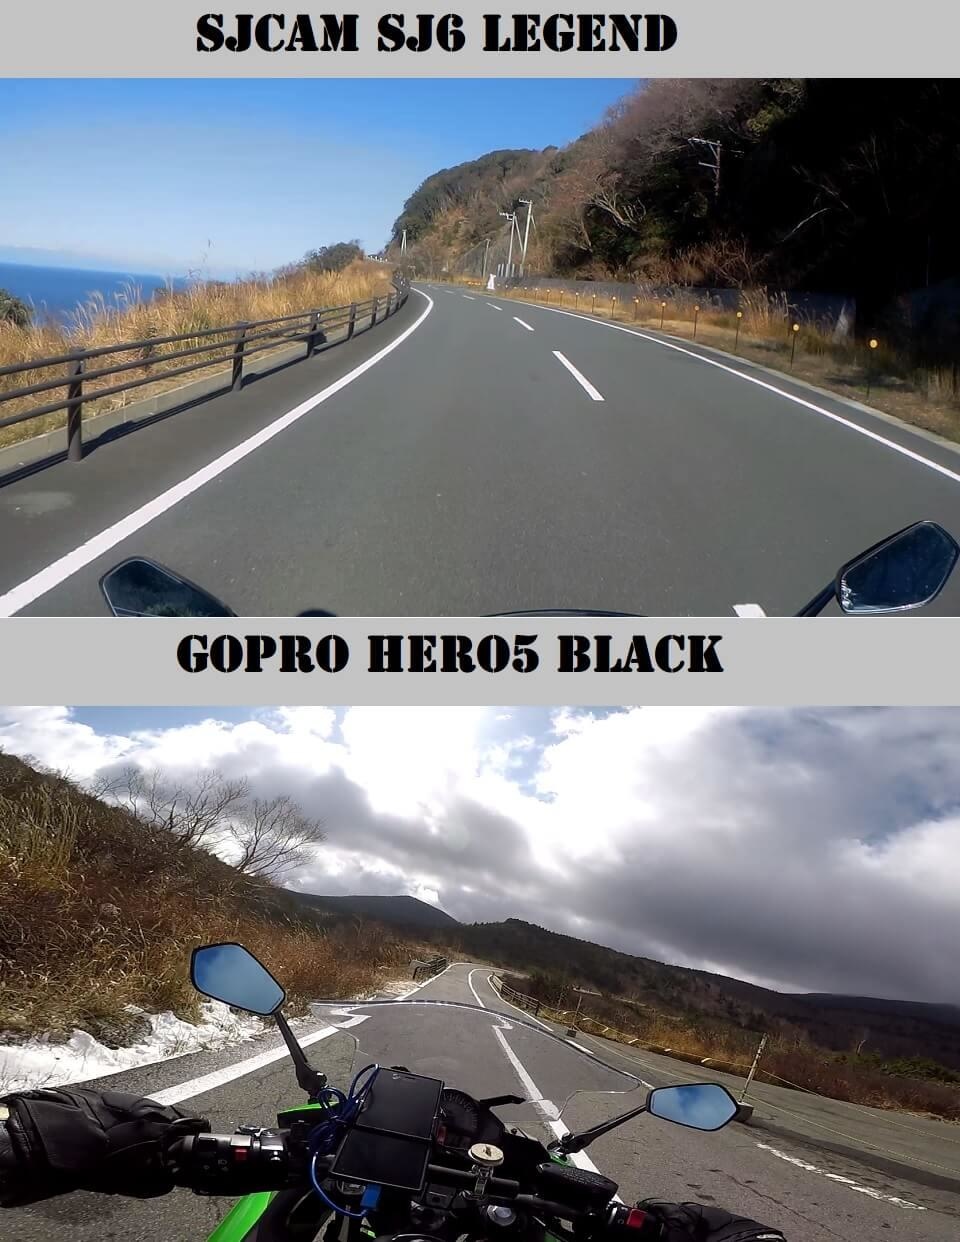 compare-with-sj6-legend-and-gopro-hero5.jpg